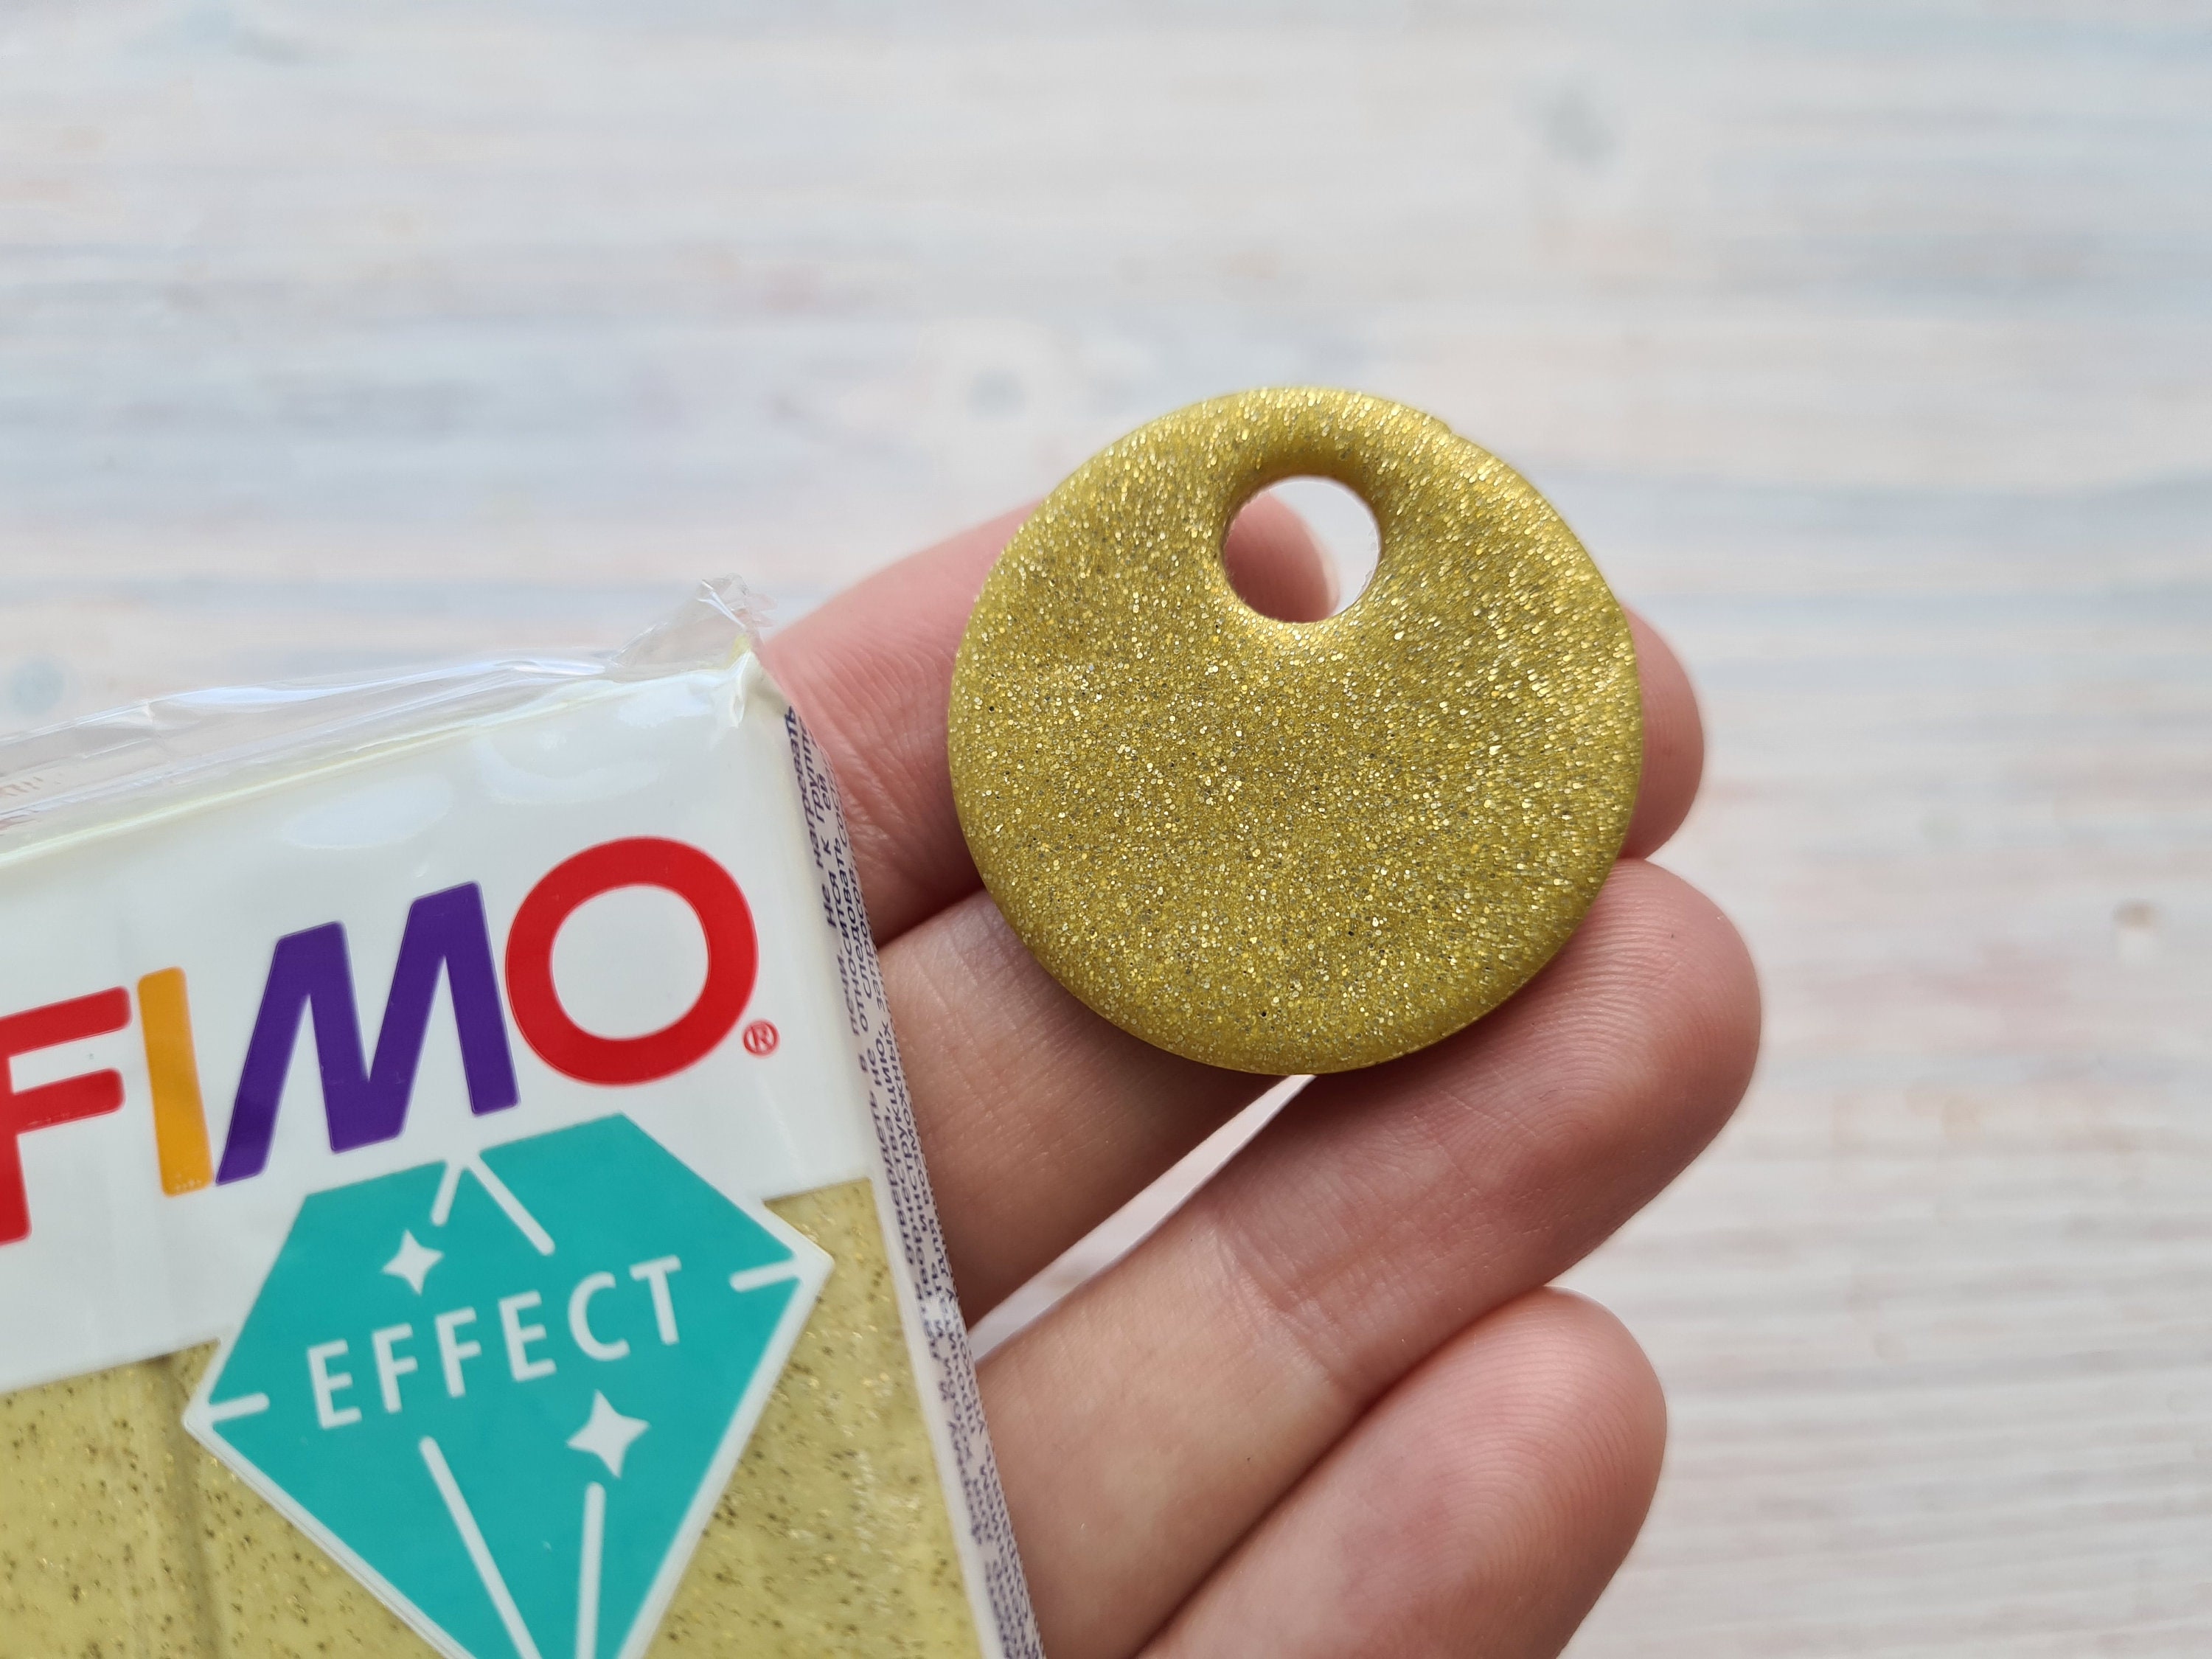 Fimo Effect Glitter Serie Polymer Clay, White glitter, Nr. 052,  57g2oz,oven-hardening Polymer Modeling Clay, Glitter Effect by STAEDTLER 